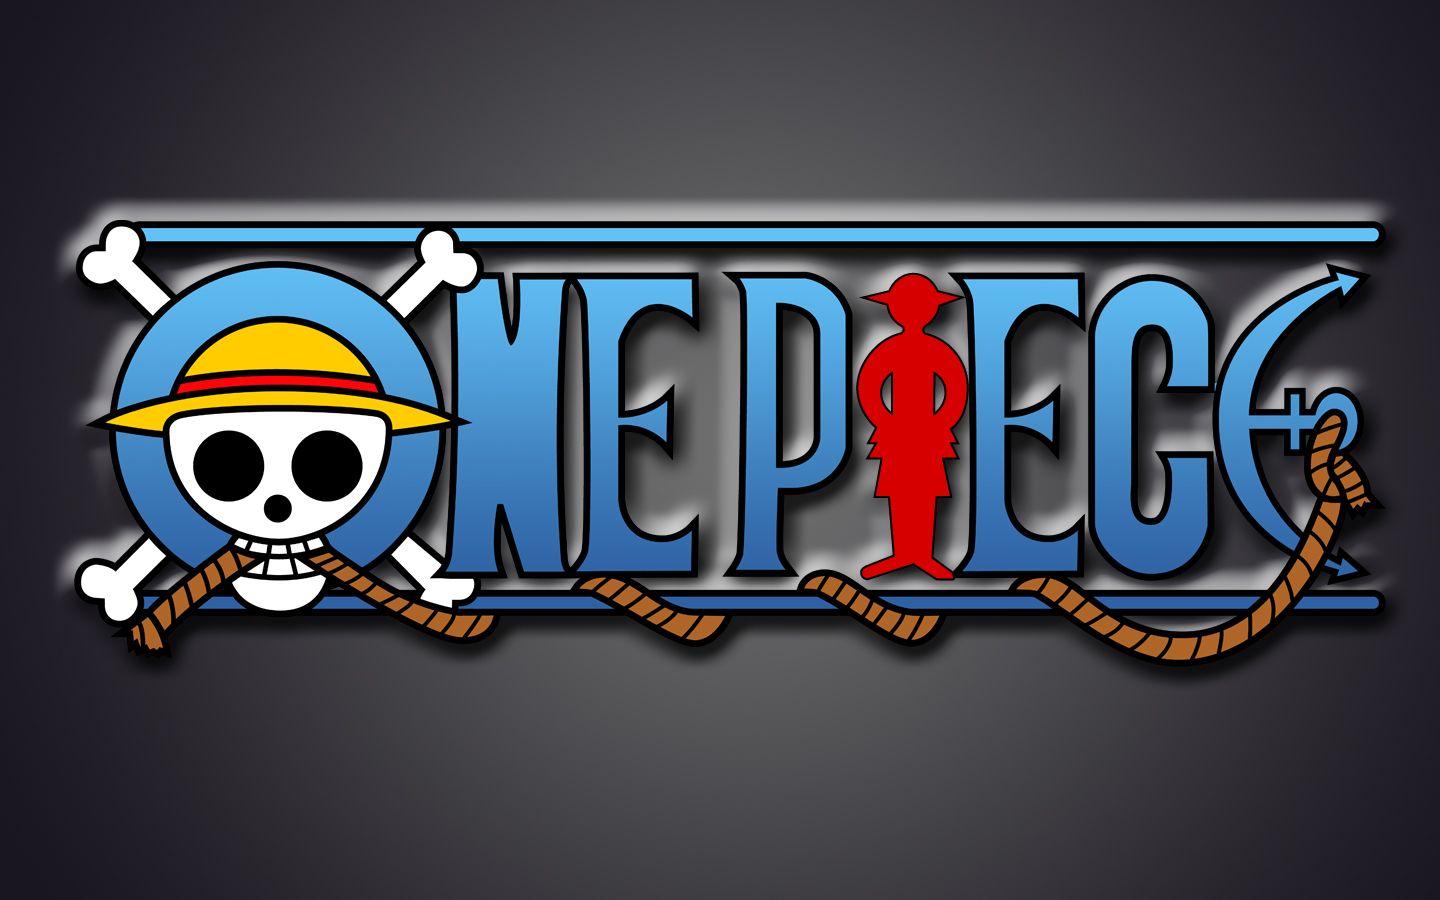 Logo One Piece Wallpapers - Wallpaper Cave